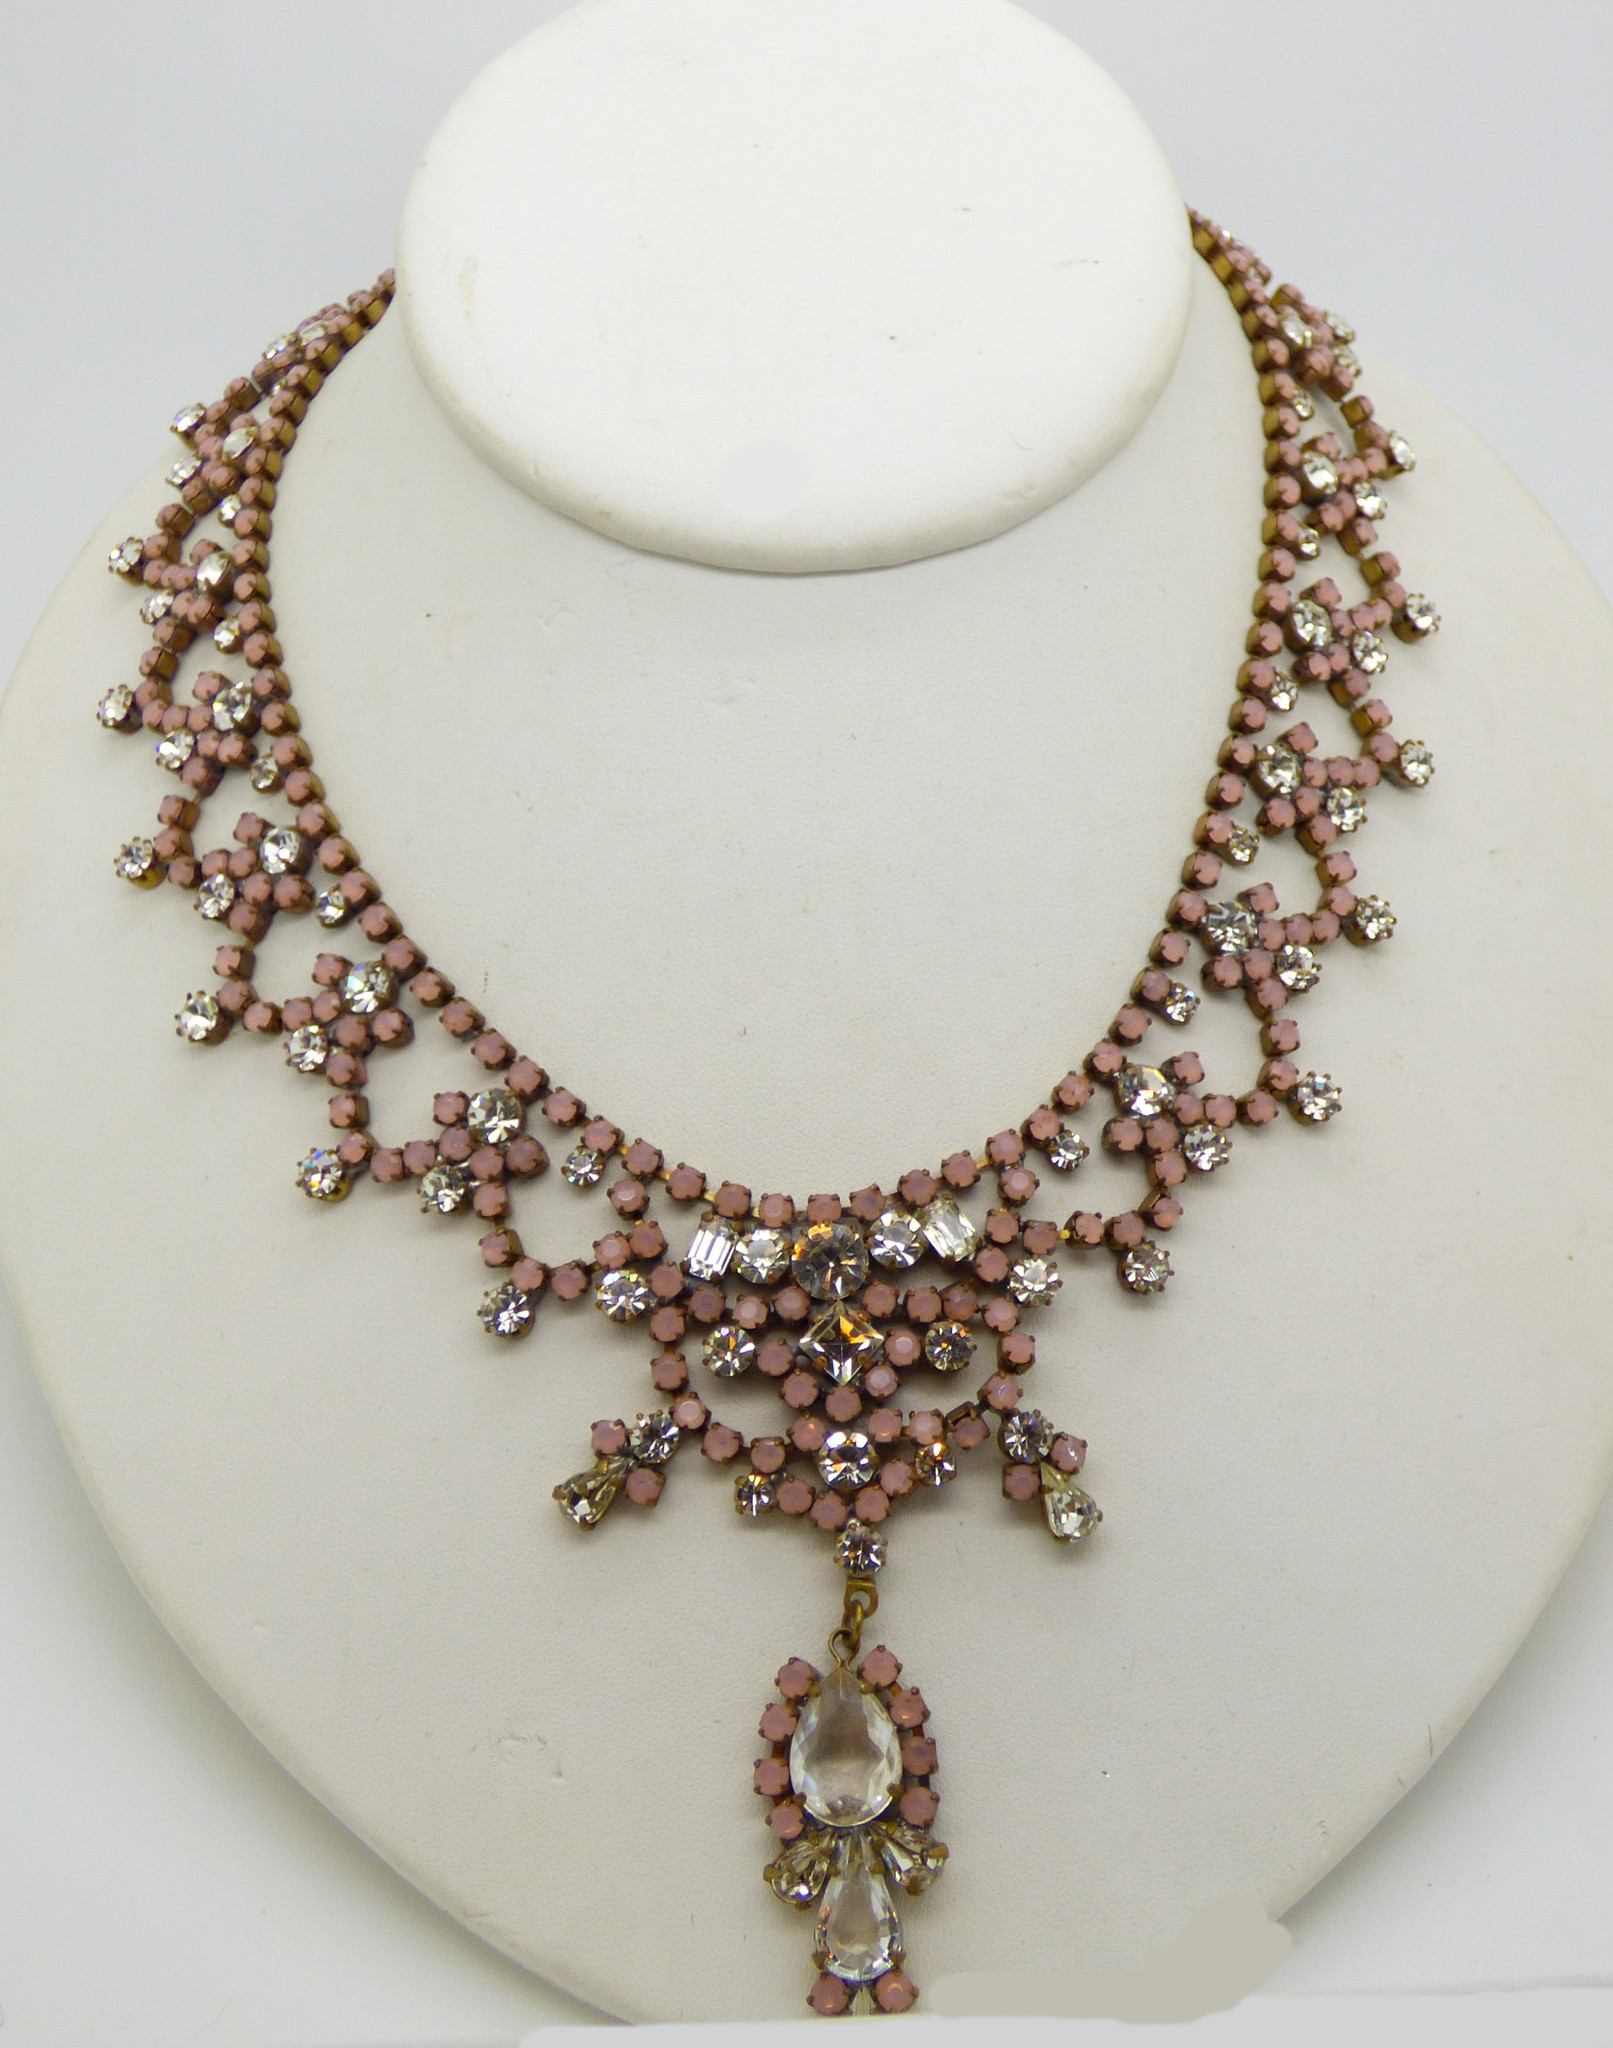 Husar D Opaque Pink and Clear Czech Glass Rhinestone Necklace - Vintage ...